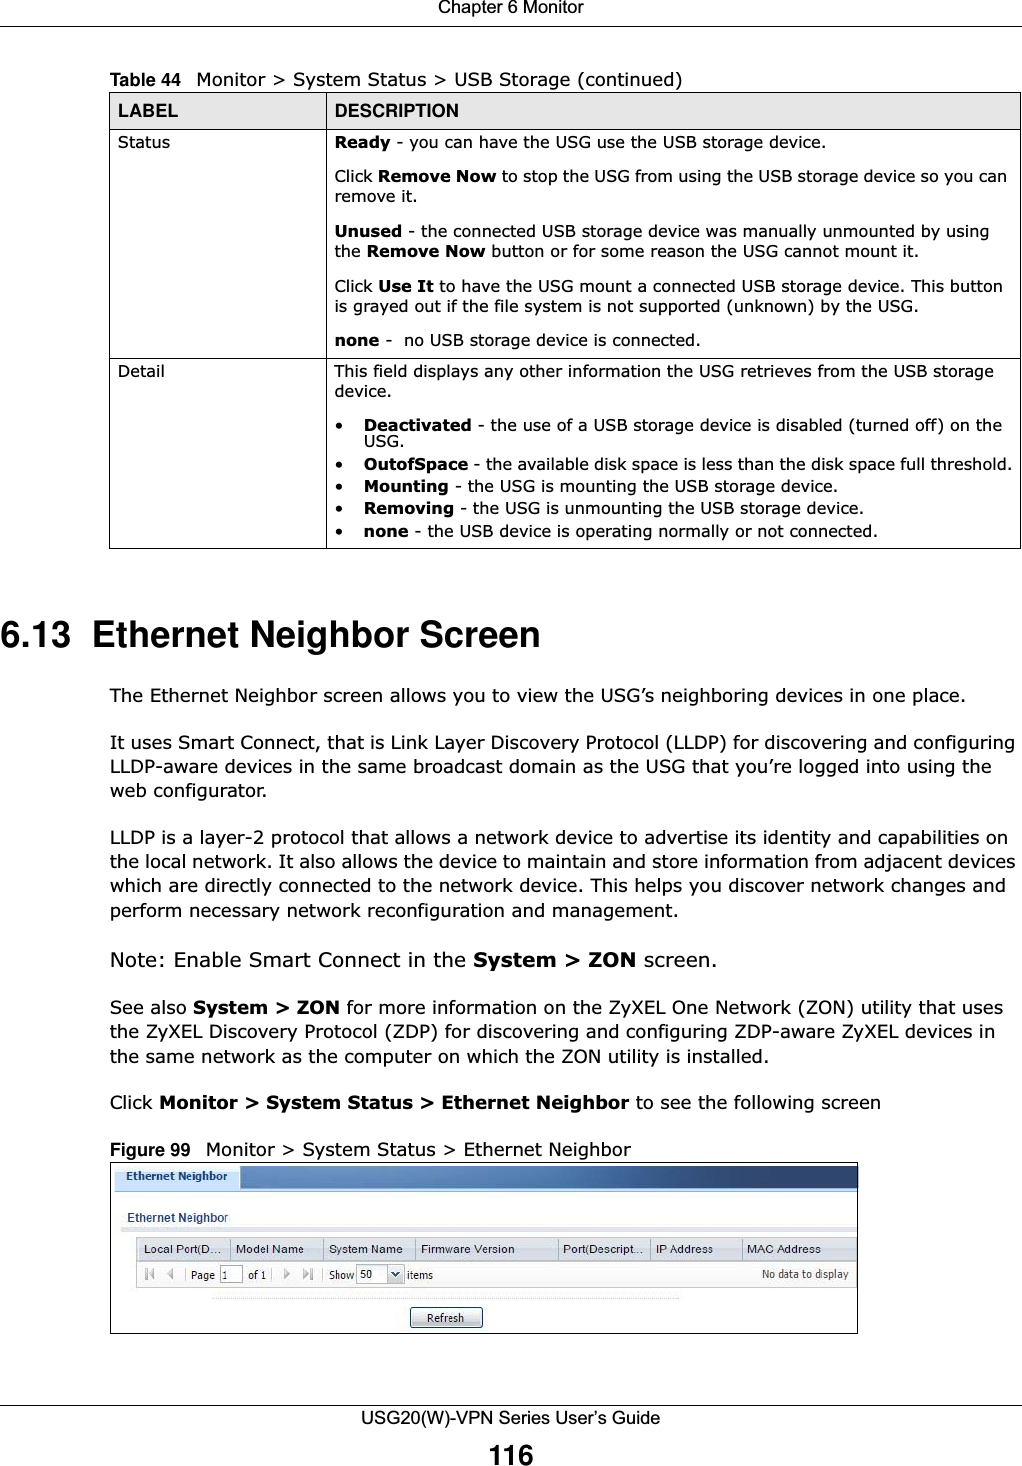 Chapter 6 MonitorUSG20(W)-VPN Series User’s Guide1166.13  Ethernet Neighbor Screen The Ethernet Neighbor screen allows you to view the USG’s neighboring devices in one place. It uses Smart Connect, that is Link Layer Discovery Protocol (LLDP) for discovering and configuring LLDP-aware devices in the same broadcast domain as the USG that you’re logged into using the web configurator.LLDP is a layer-2 protocol that allows a network device to advertise its identity and capabilities on the local network. It also allows the device to maintain and store information from adjacent devices which are directly connected to the network device. This helps you discover network changes and perform necessary network reconfiguration and management.Note: Enable Smart Connect in the System &gt; ZON screen.See also System &gt; ZON for more information on the ZyXEL One Network (ZON) utility that uses the ZyXEL Discovery Protocol (ZDP) for discovering and configuring ZDP-aware ZyXEL devices in the same network as the computer on which the ZON utility is installed.Click Monitor &gt; System Status &gt; Ethernet Neighbor to see the following screenFigure 99   Monitor &gt; System Status &gt; Ethernet NeighborStatus Ready - you can have the USG use the USB storage device. Click Remove Now to stop the USG from using the USB storage device so you can remove it. Unused - the connected USB storage device was manually unmounted by using the Remove Now button or for some reason the USG cannot mount it. Click Use It to have the USG mount a connected USB storage device. This button is grayed out if the file system is not supported (unknown) by the USG.none -  no USB storage device is connected.Detail This field displays any other information the USG retrieves from the USB storage device. •Deactivated - the use of a USB storage device is disabled (turned off) on the USG.•OutofSpace - the available disk space is less than the disk space full threshold.•Mounting - the USG is mounting the USB storage device. •Removing - the USG is unmounting the USB storage device. •none - the USB device is operating normally or not connected.Table 44   Monitor &gt; System Status &gt; USB Storage (continued)LABEL DESCRIPTION